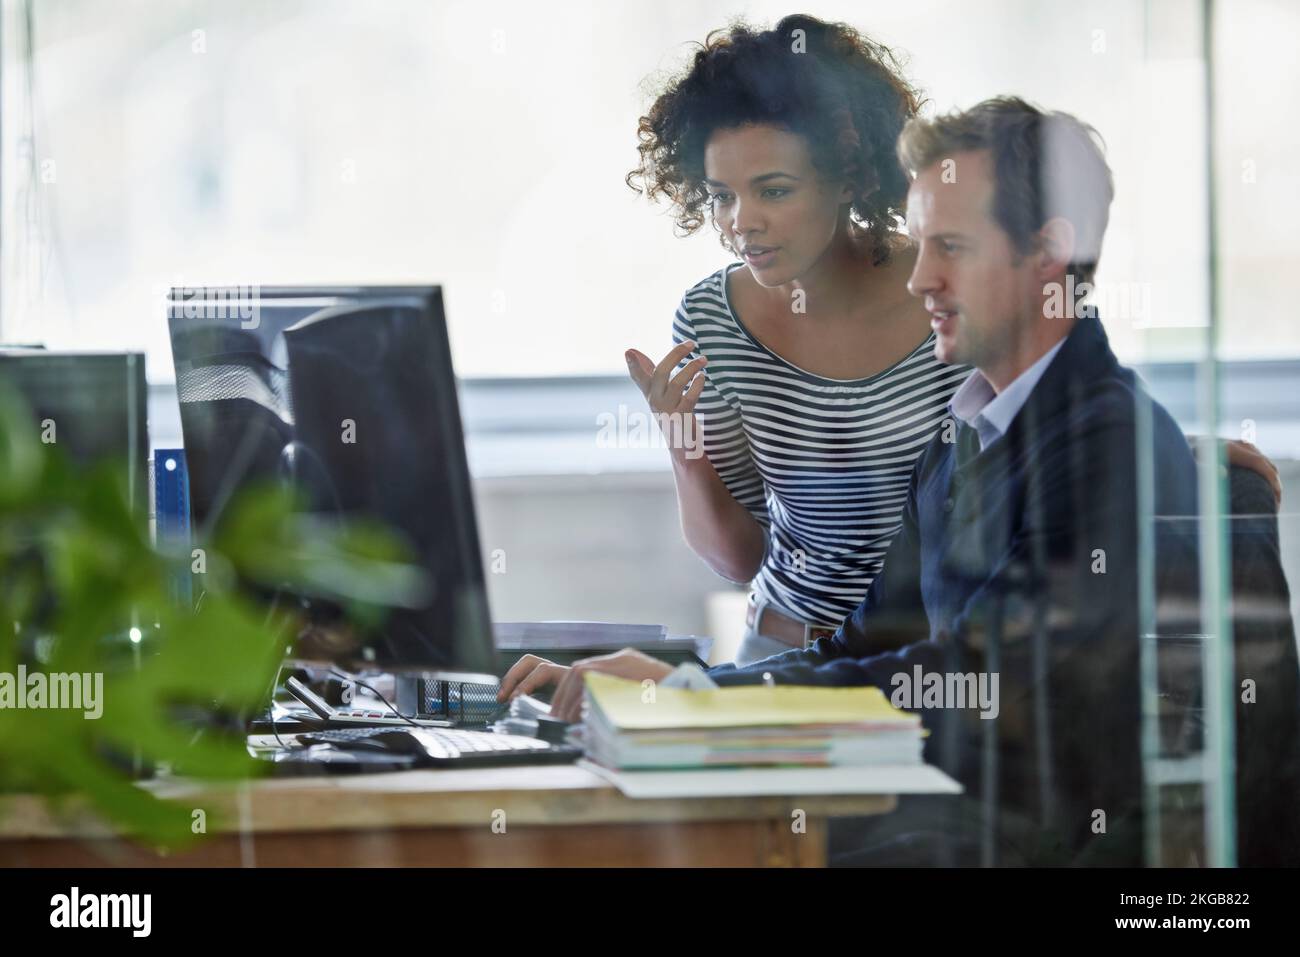 Voicing some ideas. two young designers working on a pc. Stock Photo